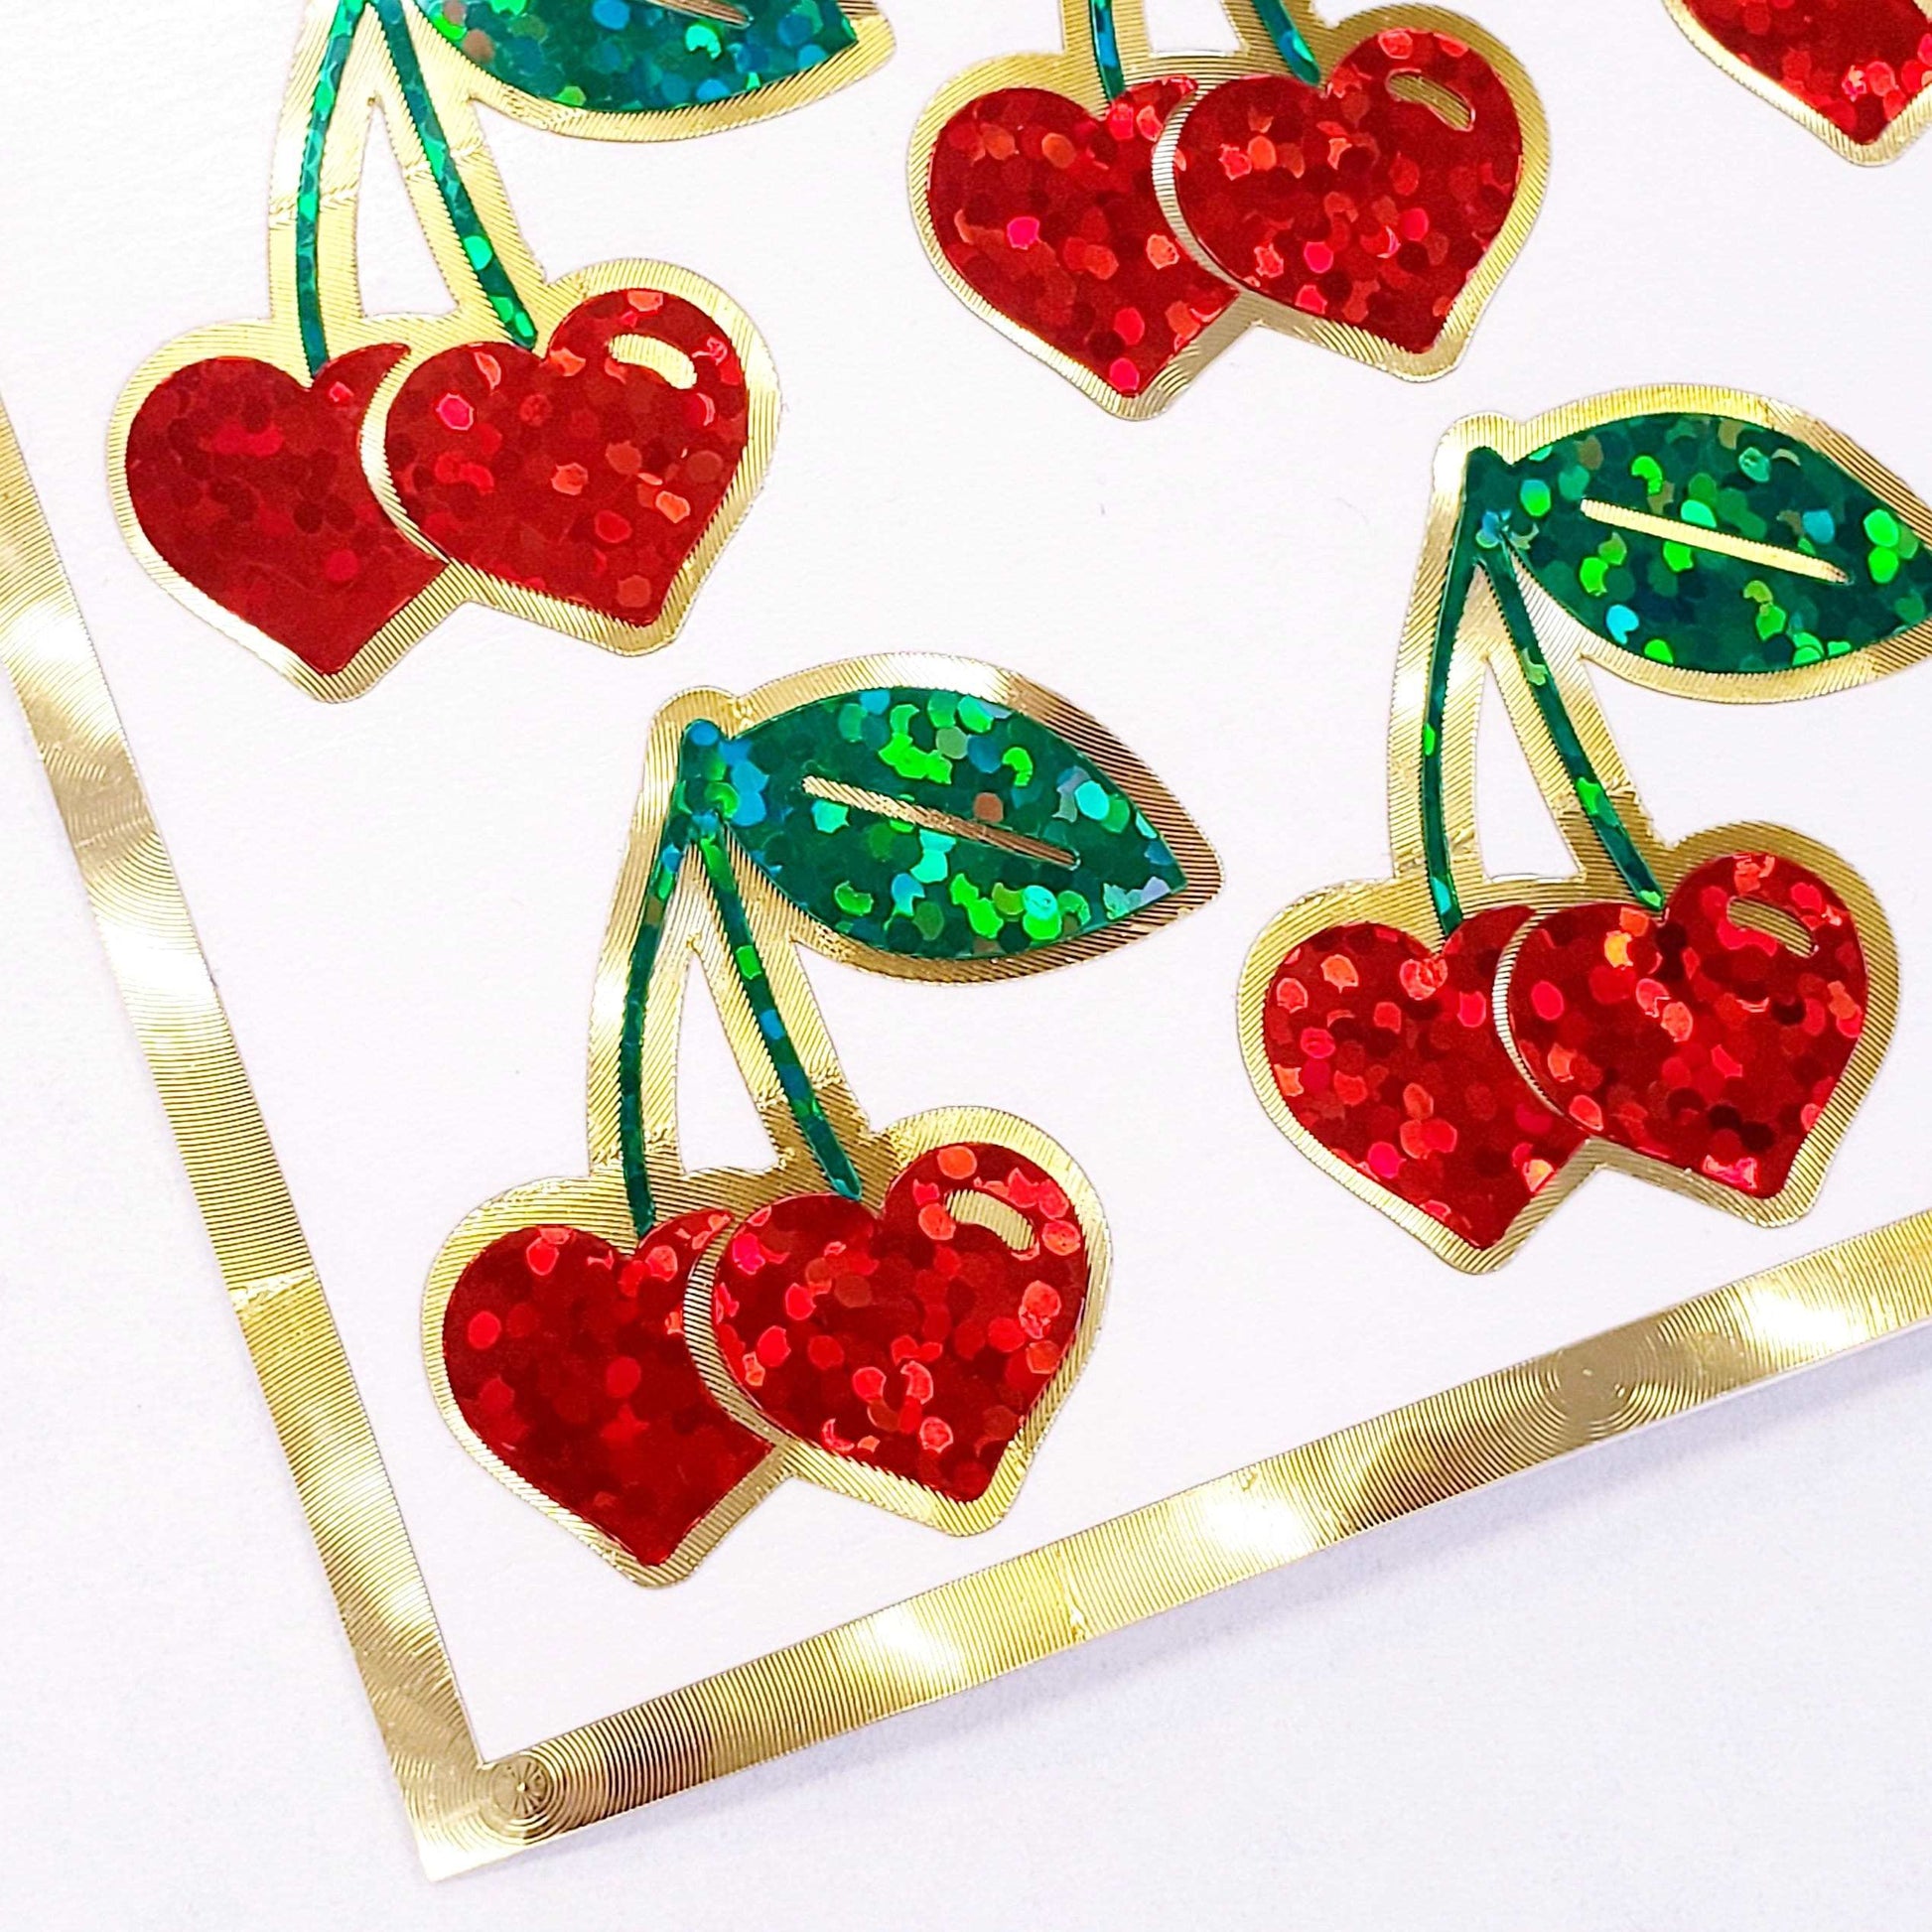 Red Cherry Heart Stickers, set of 24 cute fruit glitter decals for Valentine's Day cards, envelope seals, sticker gift for teachers.